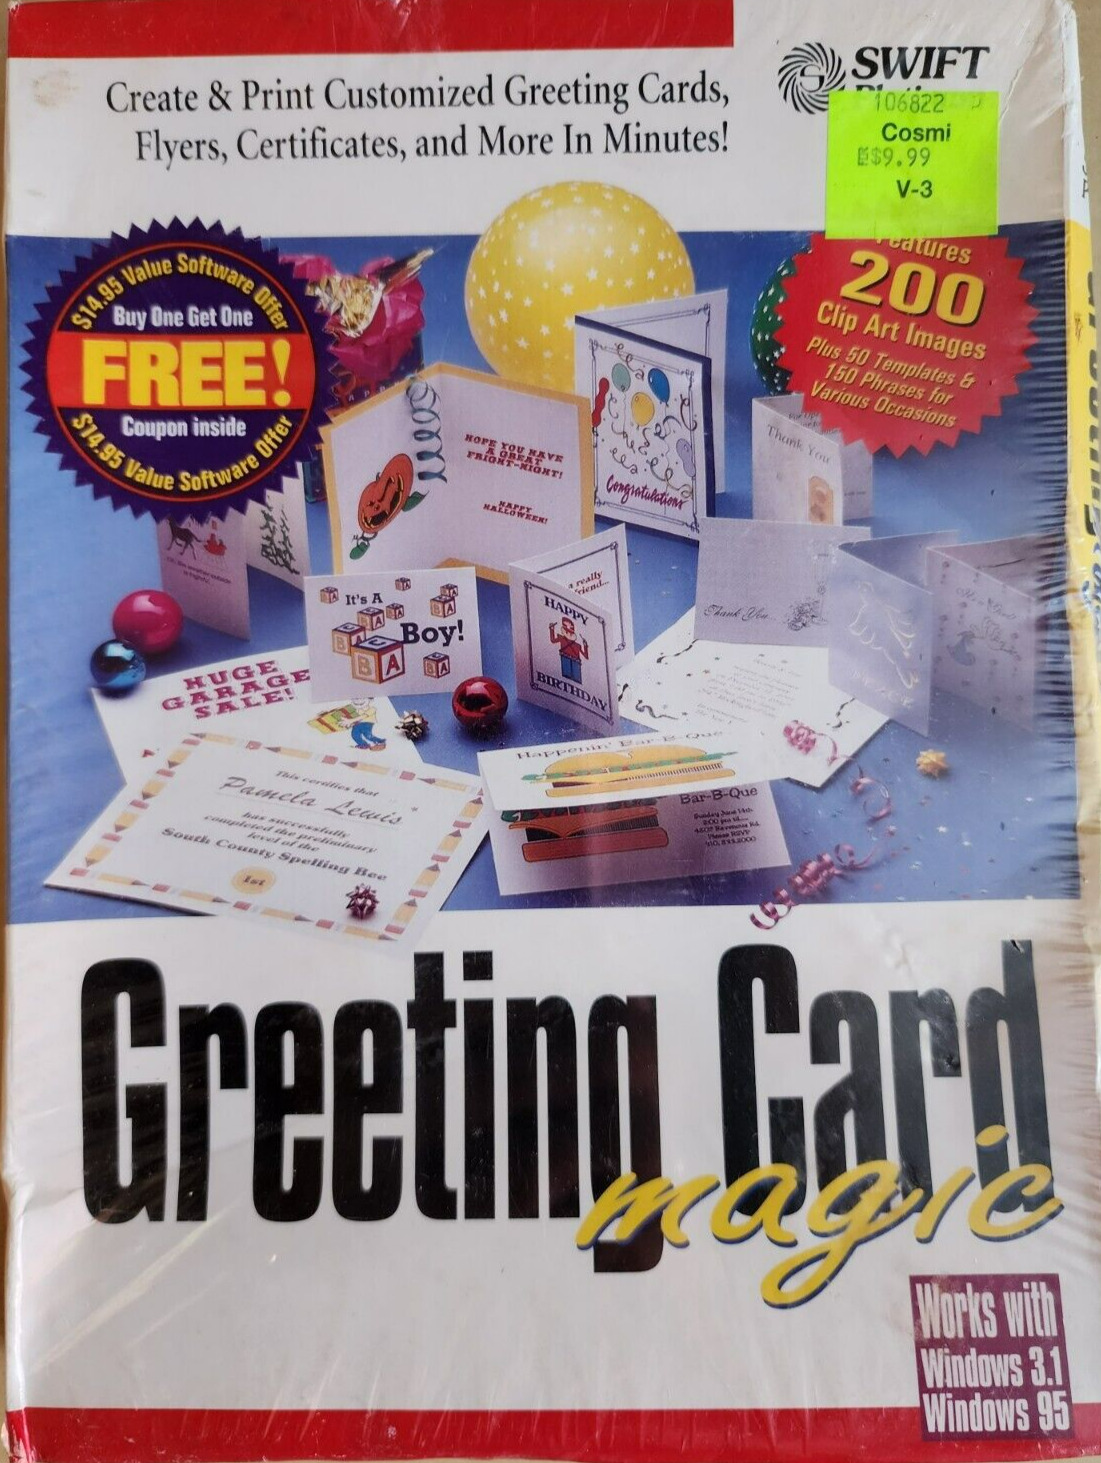 Swift Greeting Card Magic Windows 95 And Higher New Still In The Plastic Seal